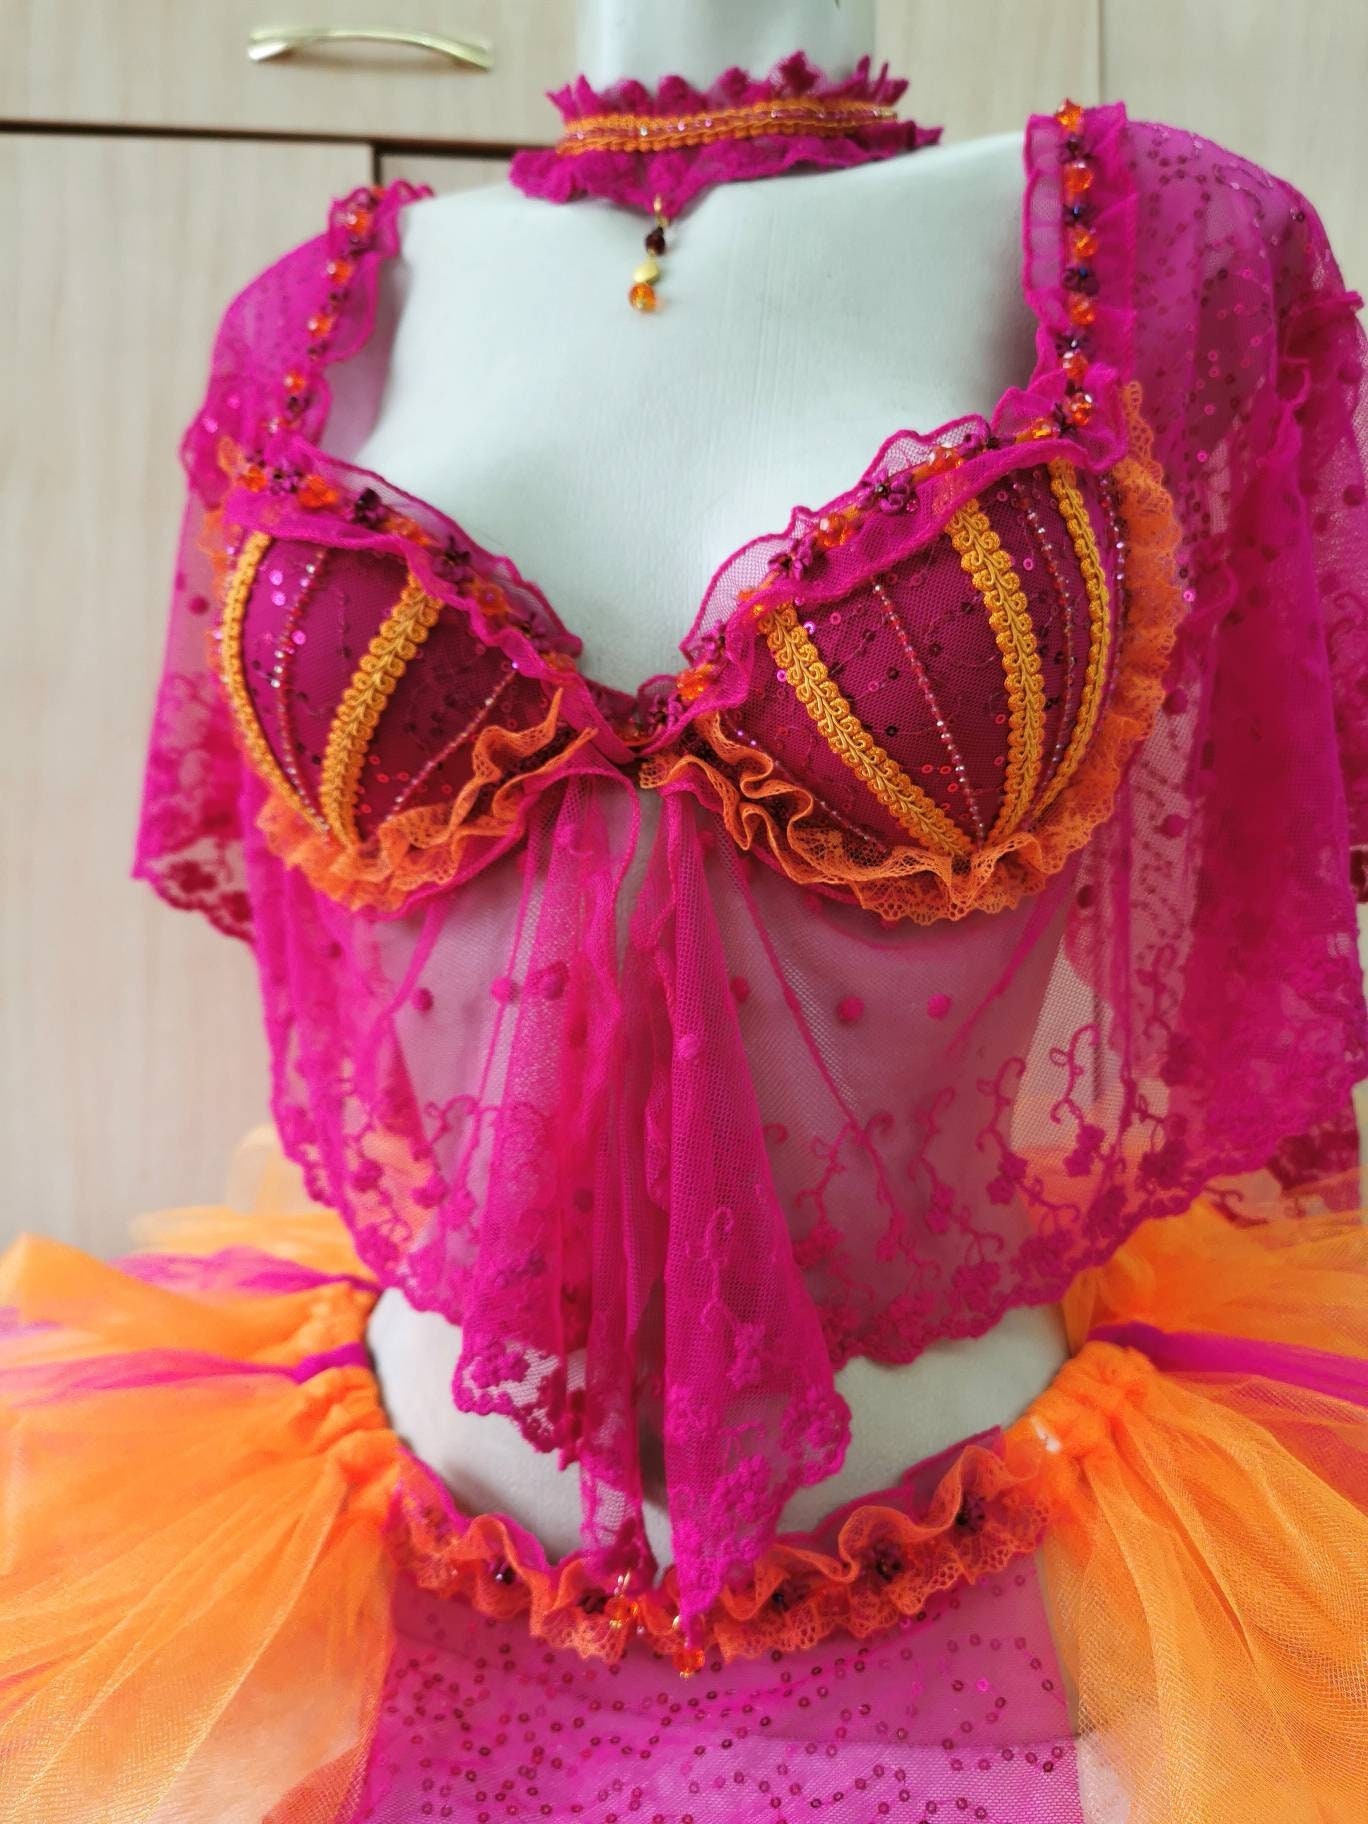 Pink and Purple Flower Rave Bra - For any Rave Outfit, edm Bra